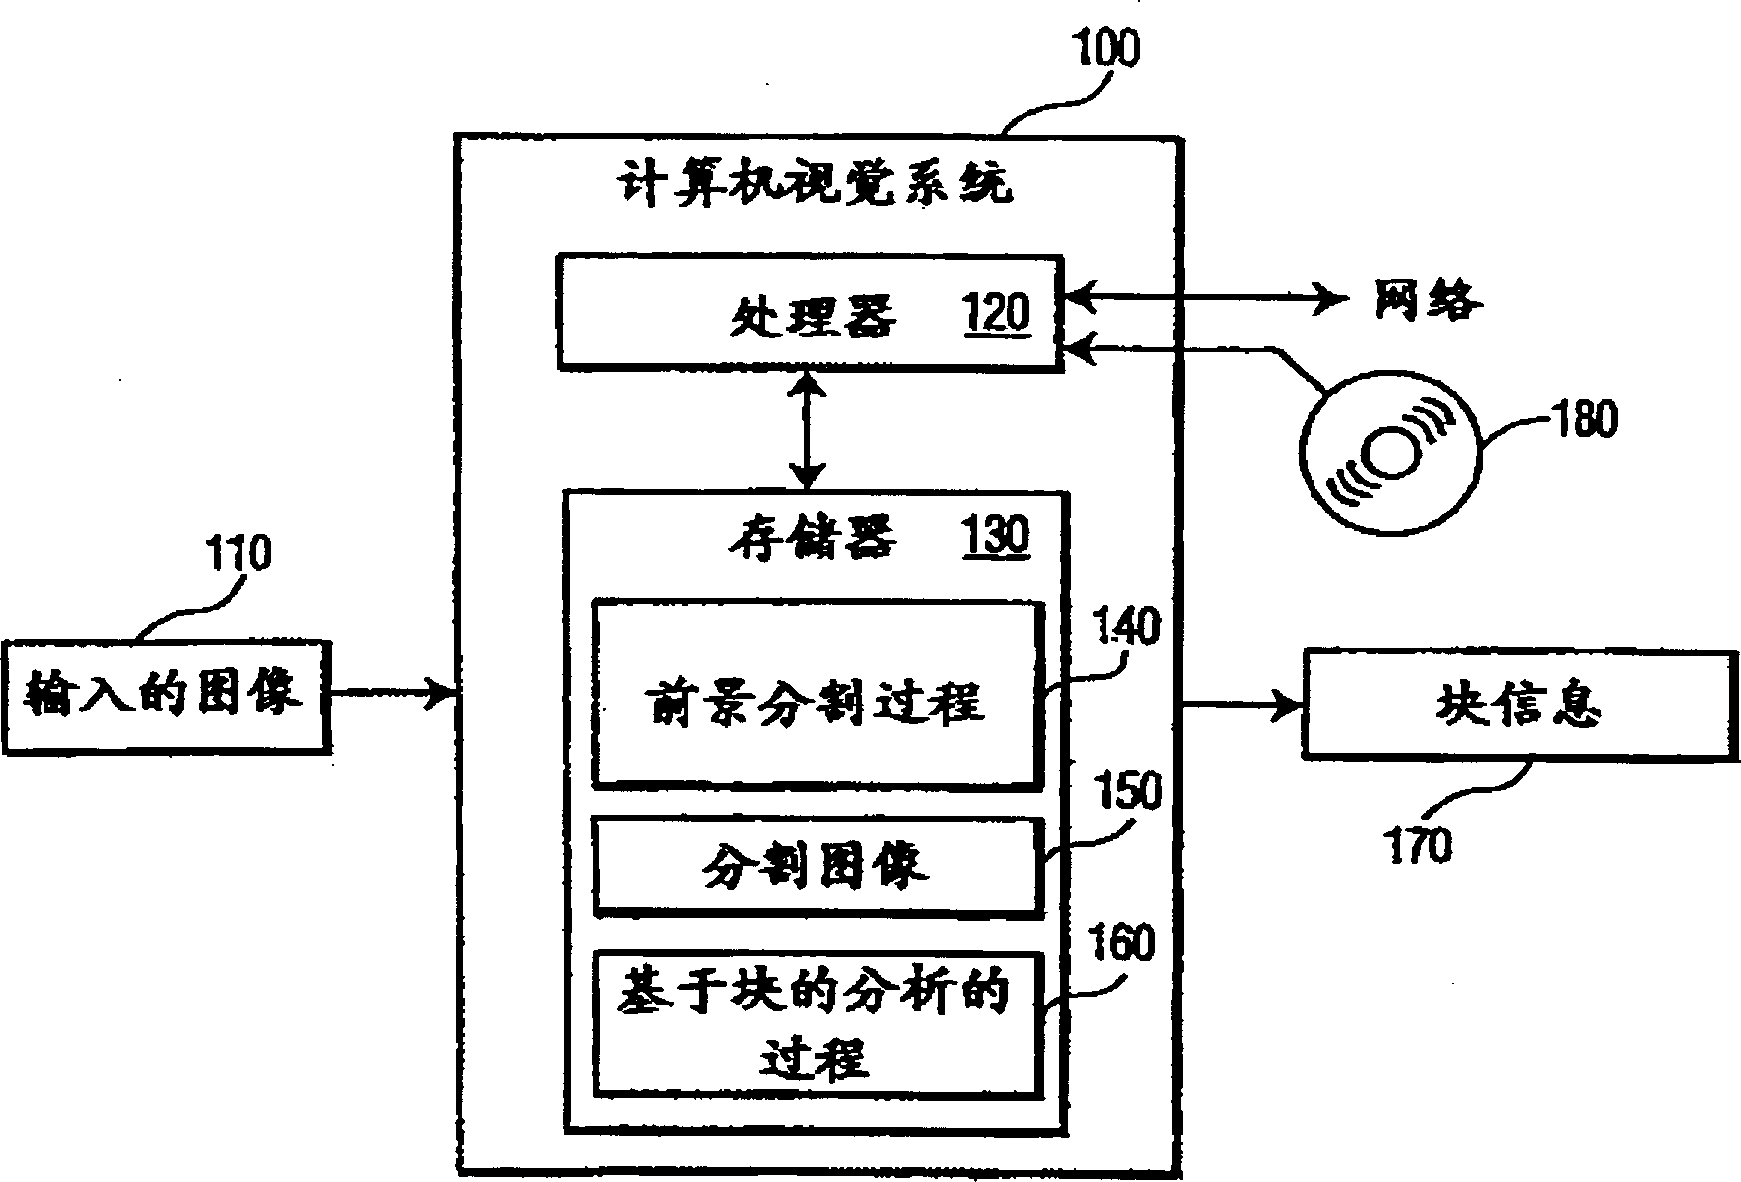 Computer vision method and system for blob-based analysis using a probabilistic framework